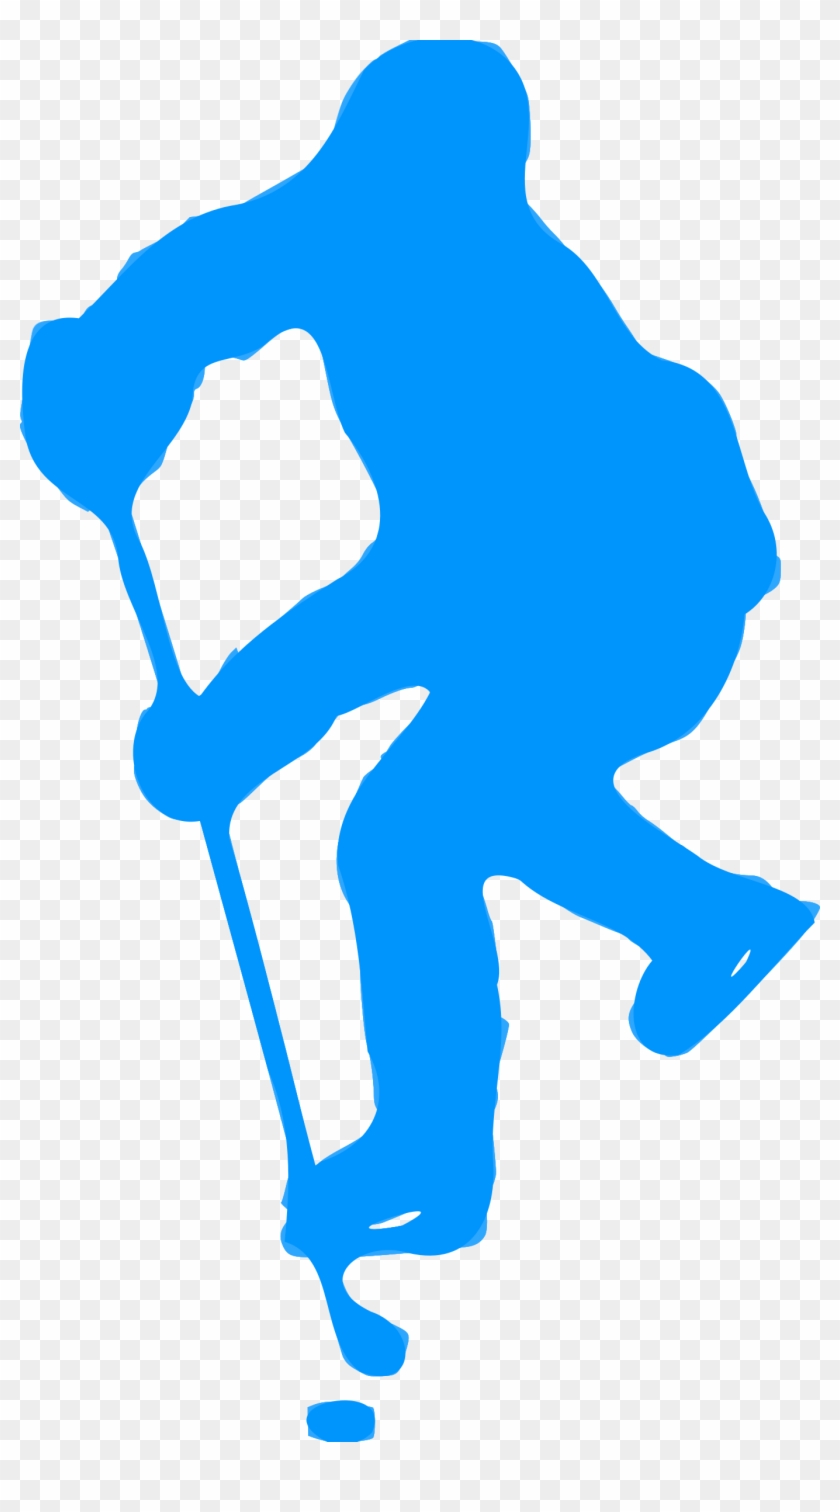 Silhouette Hockey 03 - Ice Hockey Player Silhouette Png #76236